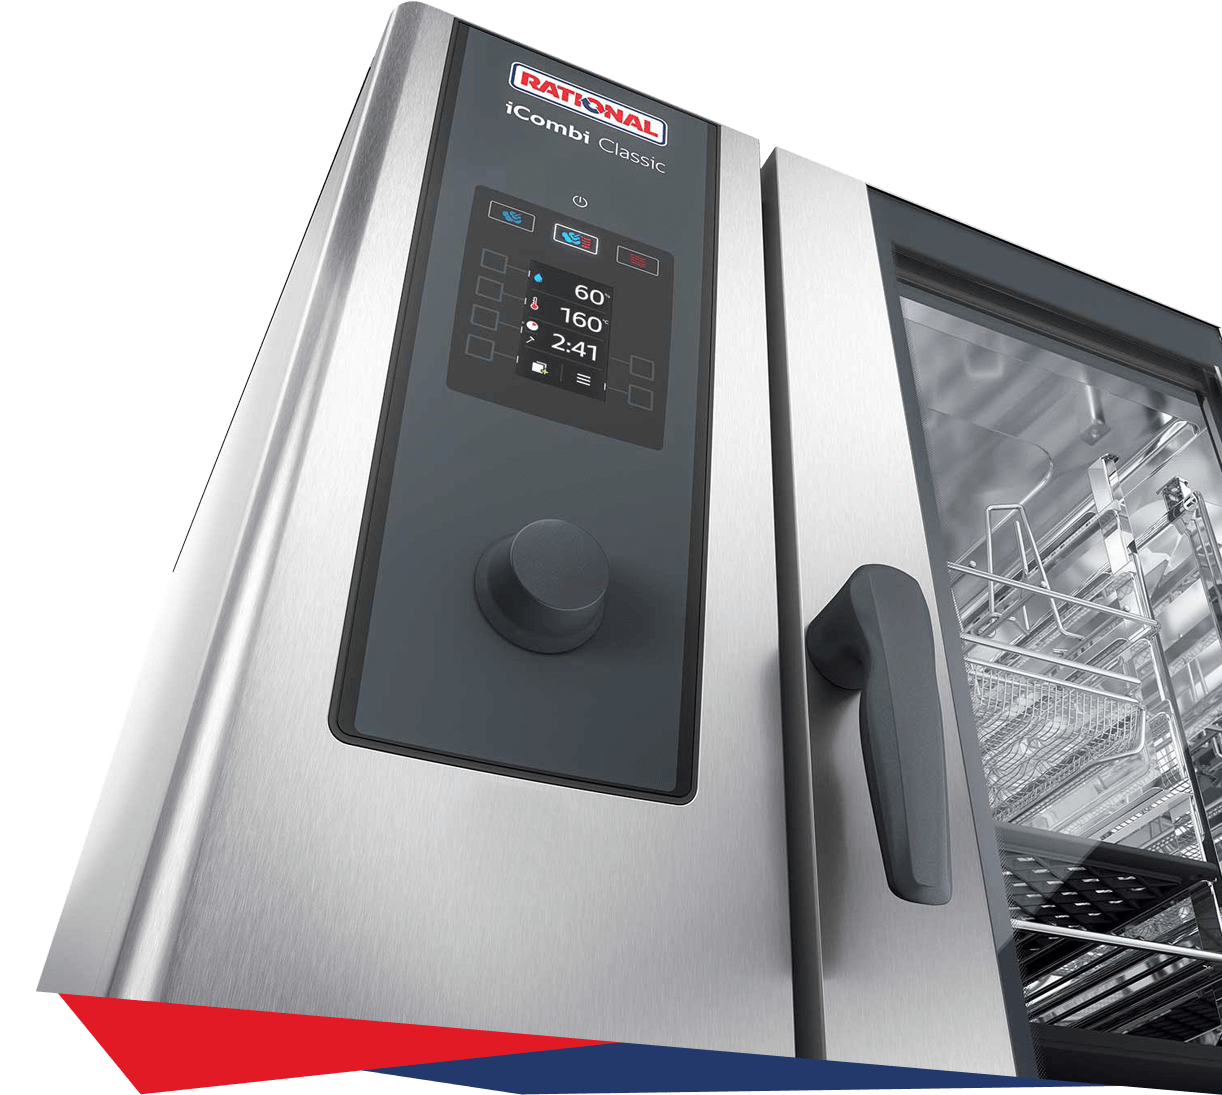 Rational combi oven product